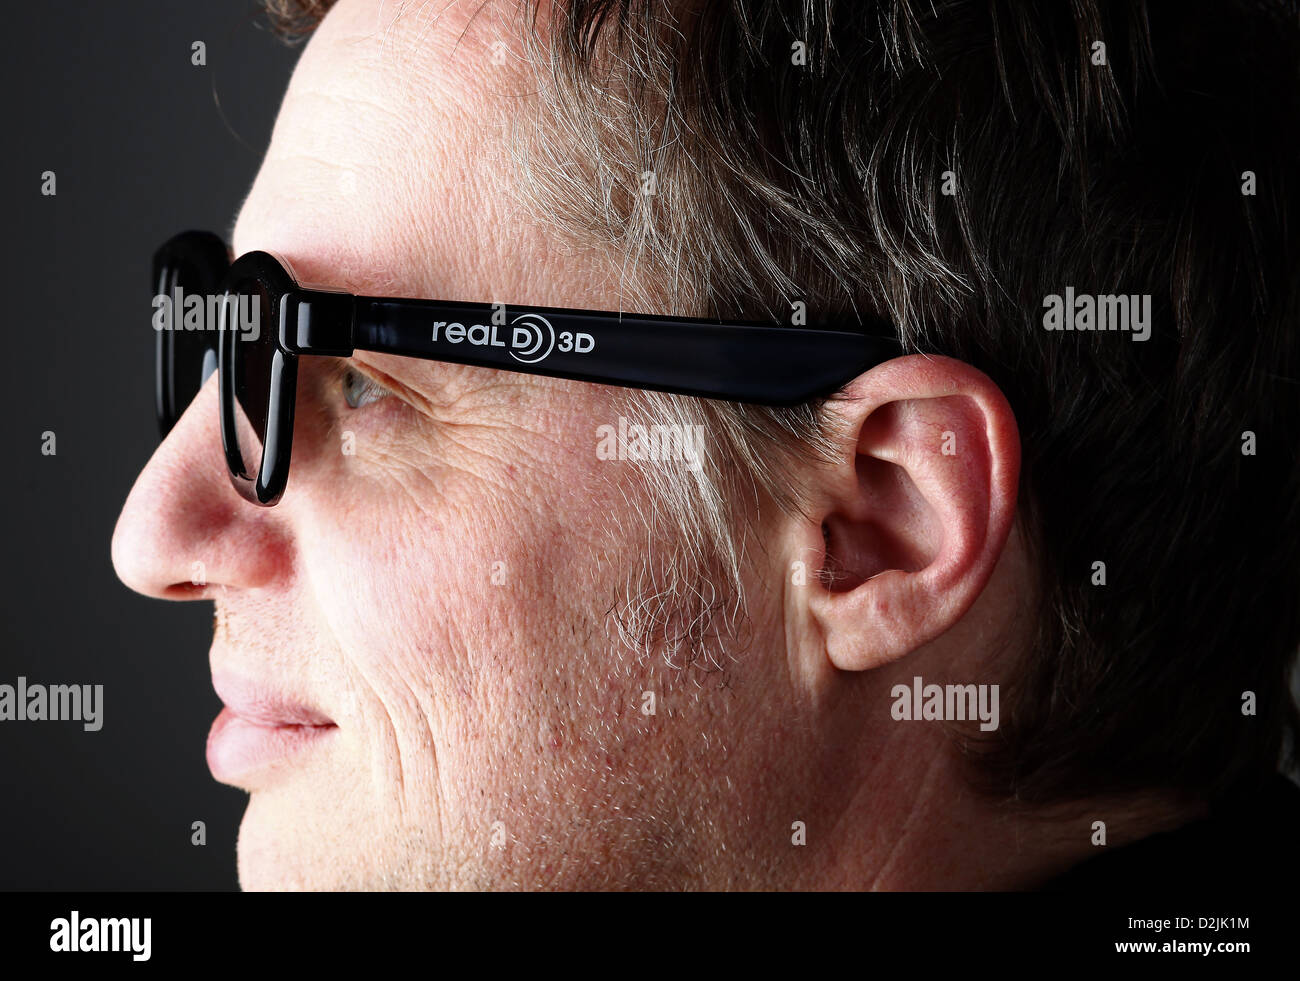 Berlin, Germany, a man with 3D glasses Stock Photo